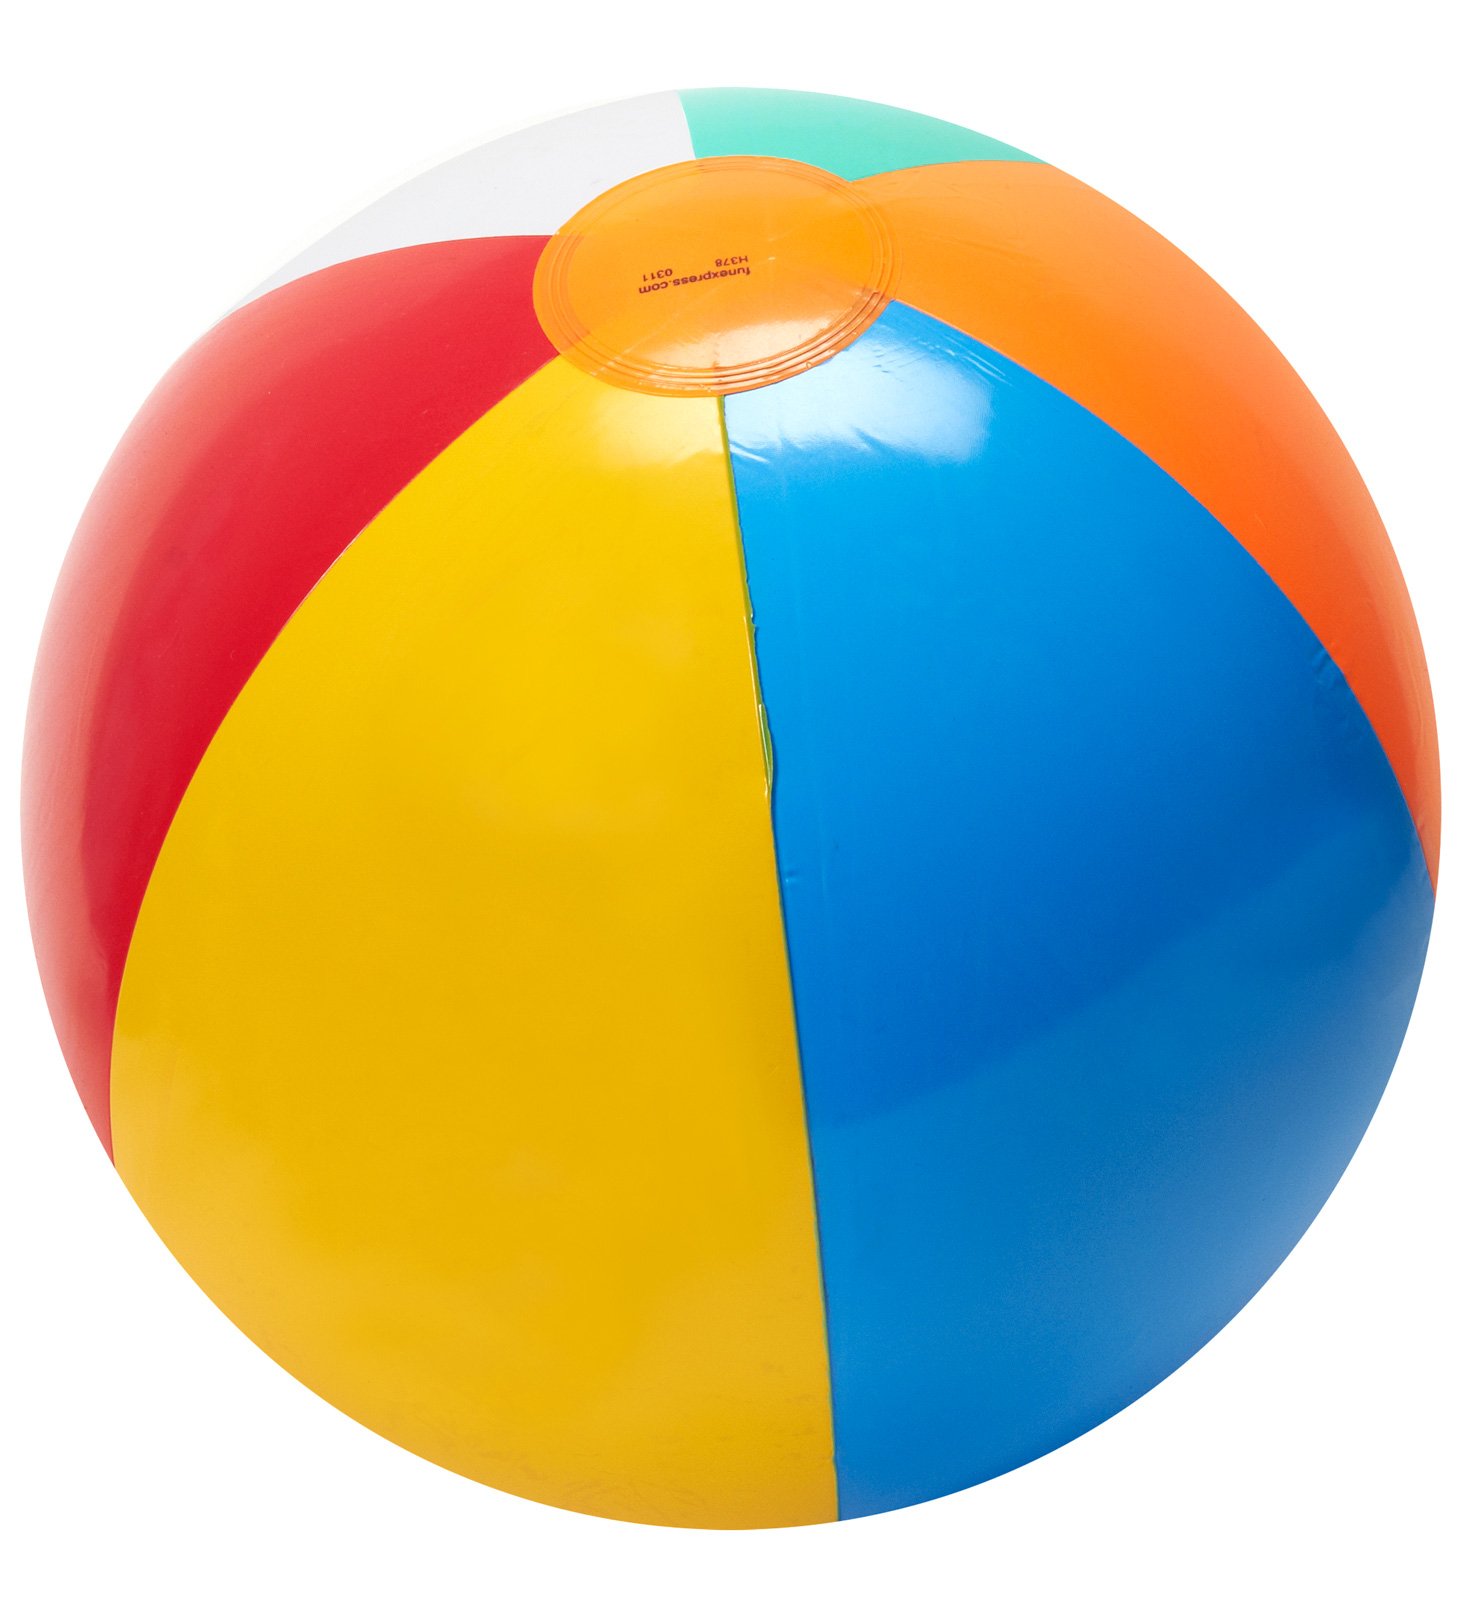 Beach ball picture clipart - Cliparting.com